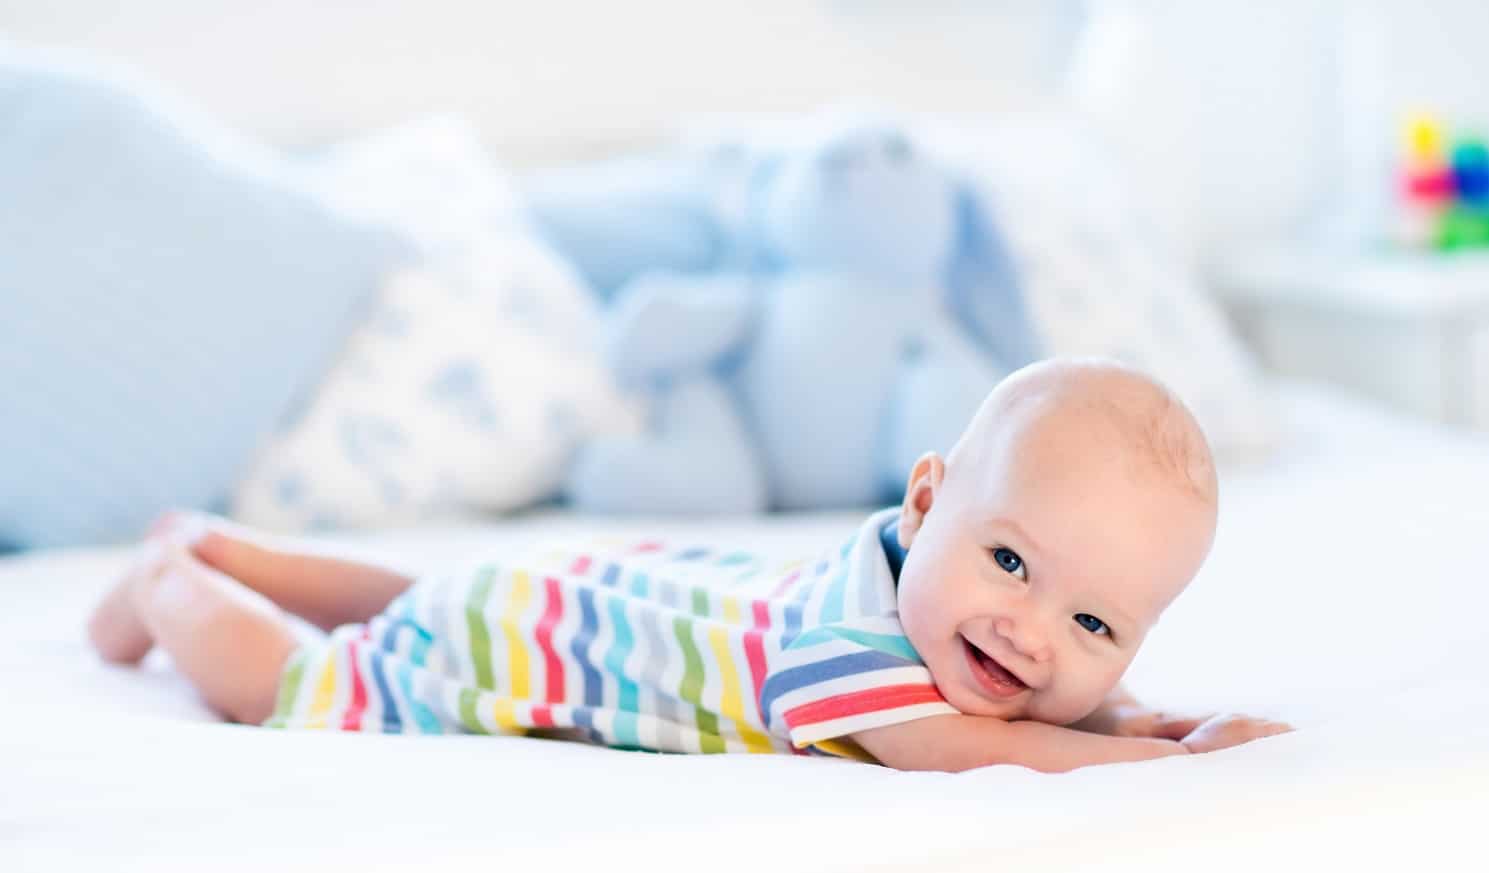 know the interesting reasons of babies smile during sleep - Know the Interesting Reasons of Babies Smile during Sleep